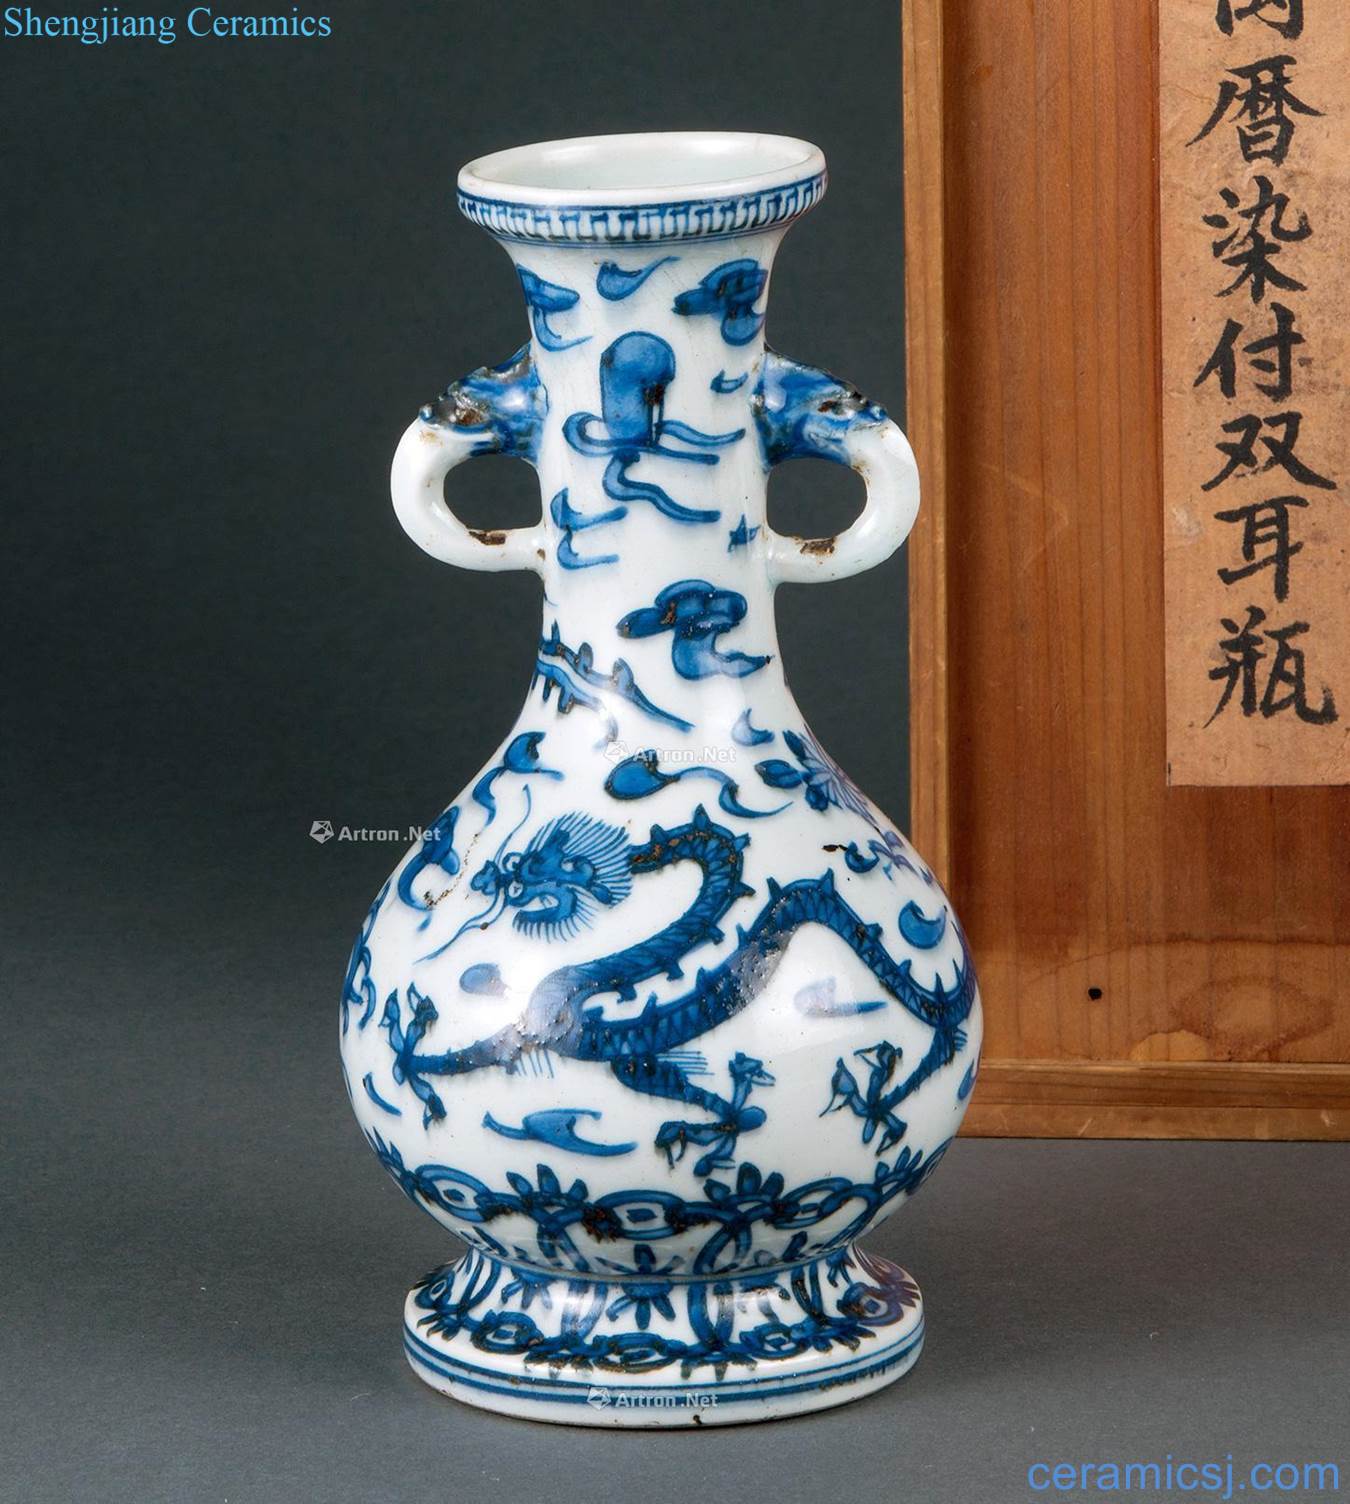 Qing dynasty Imitation Ming blue and white dragon bottle of my ears